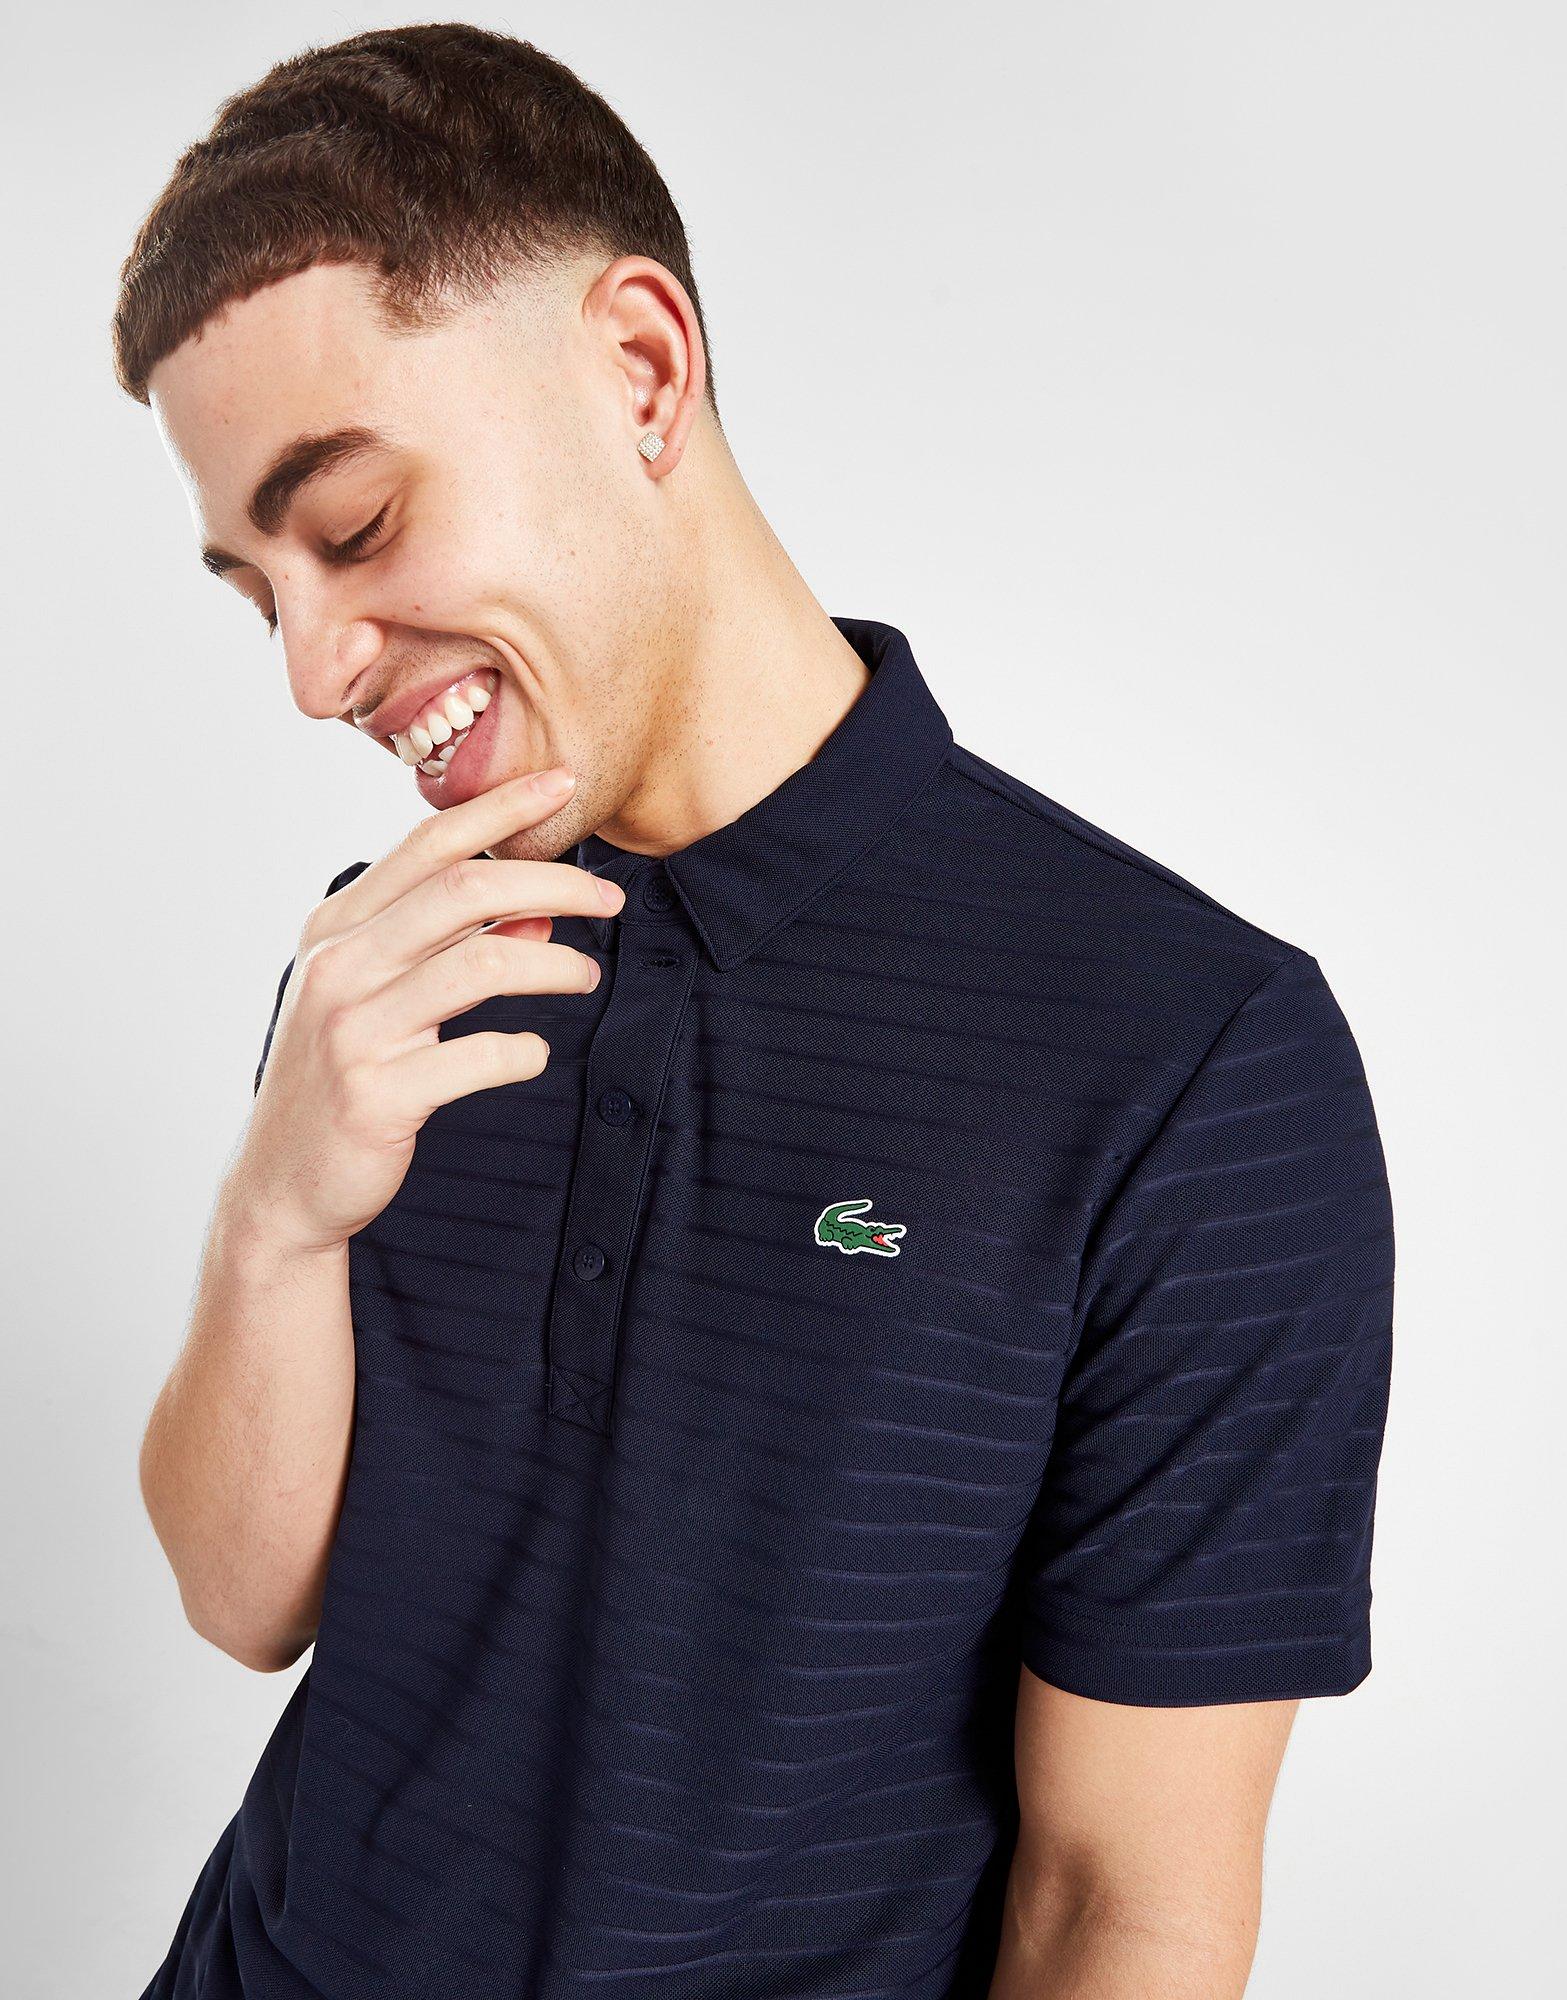 Brug for dæmning to uger Lacoste Golf Striped Polo Shirt - JD Sports Danmark